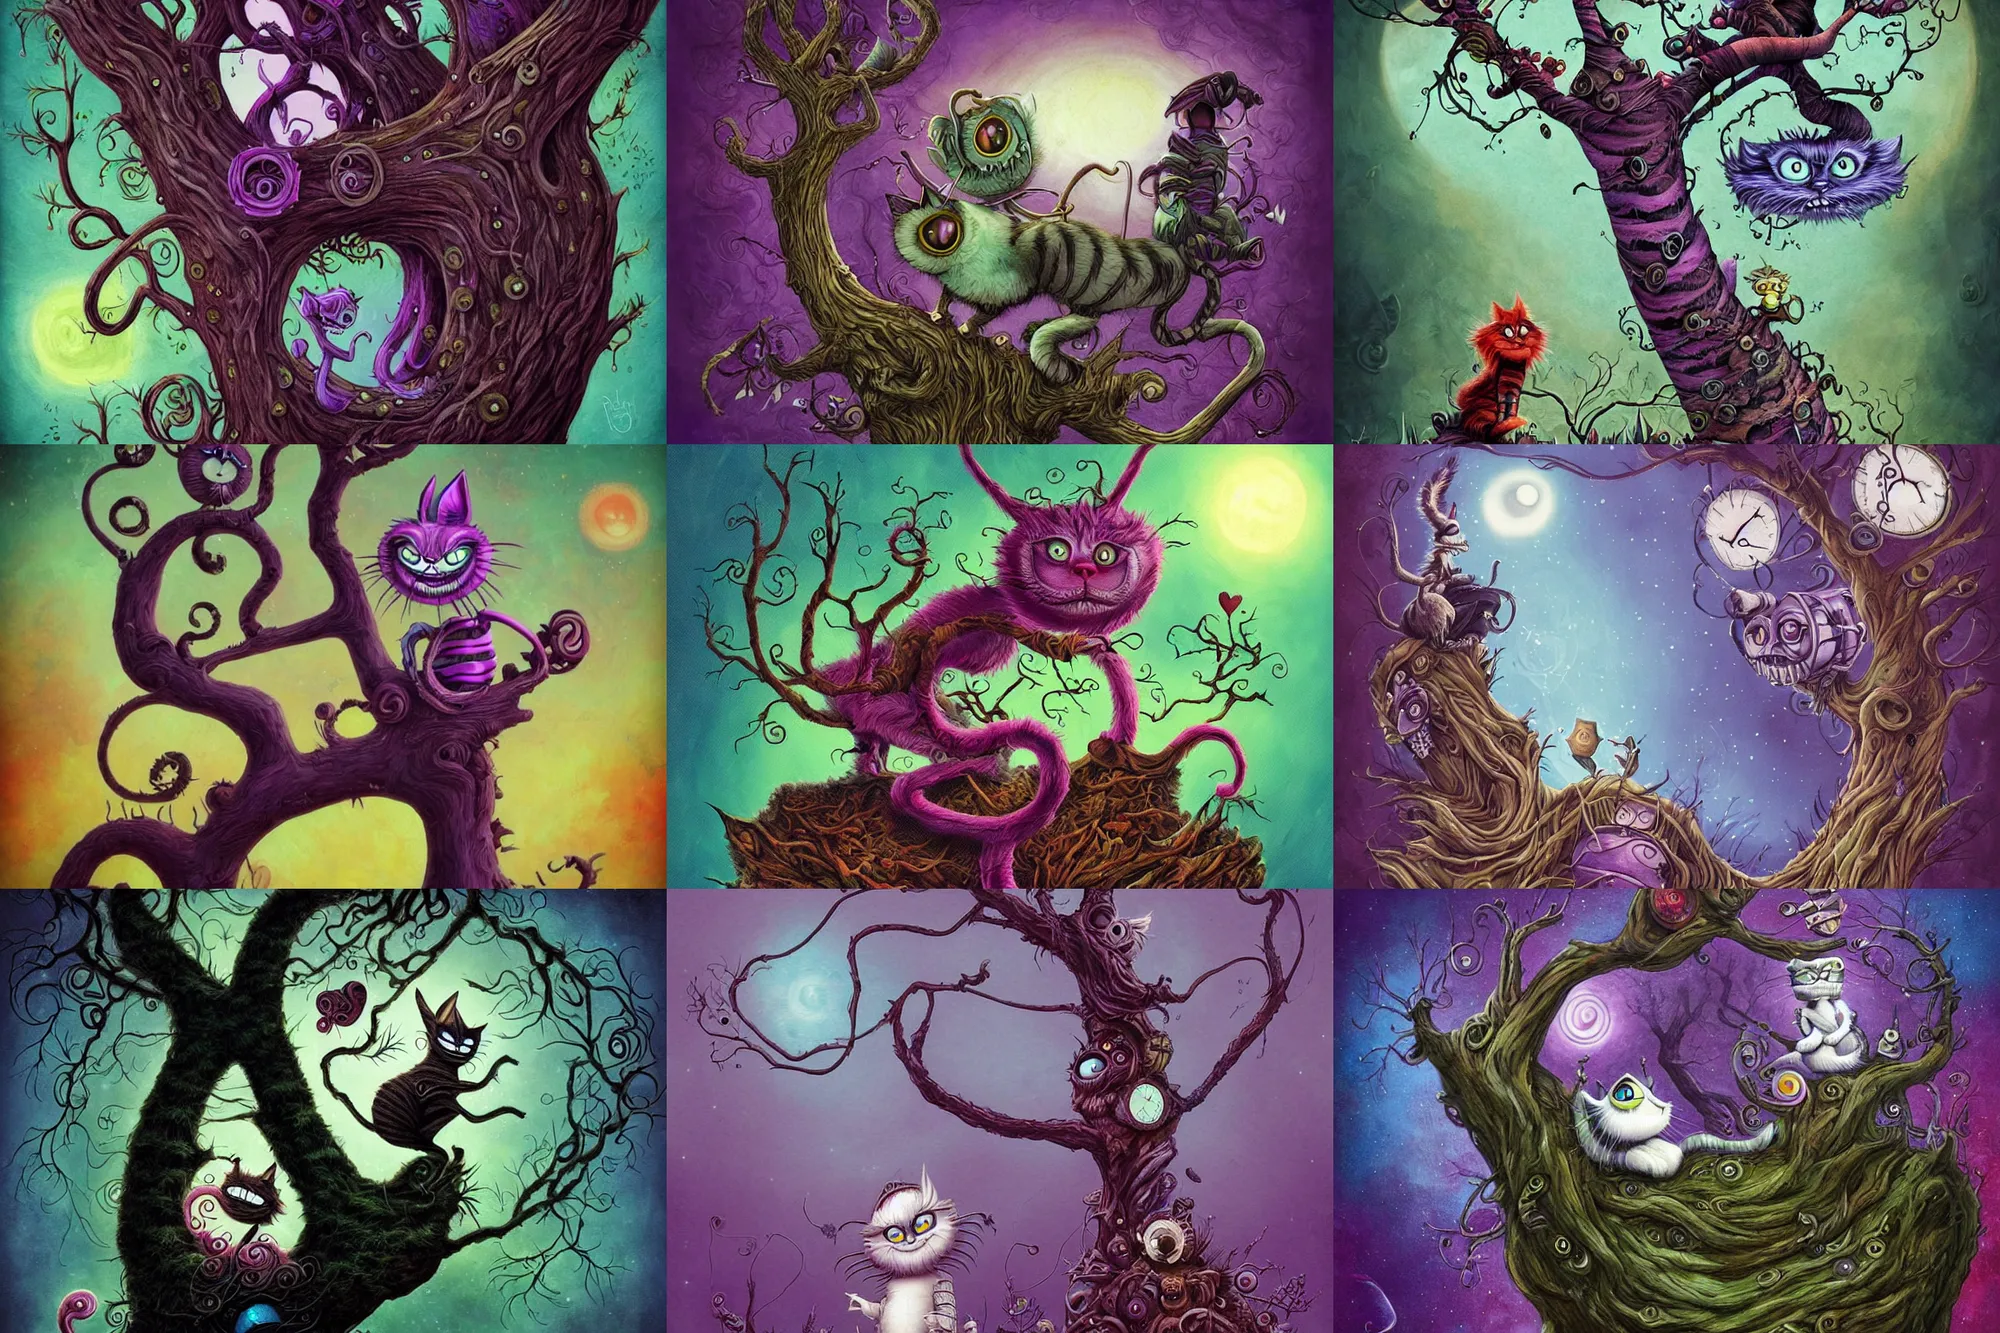 Prompt: The Cheshire Cat talking on a tree, biomechanoid, sci-fi, dramatic, art style Megan Duncanson and Benjamin Lacombe, super details, dark dull colors, ornate background, mysterious, eerie, sinister